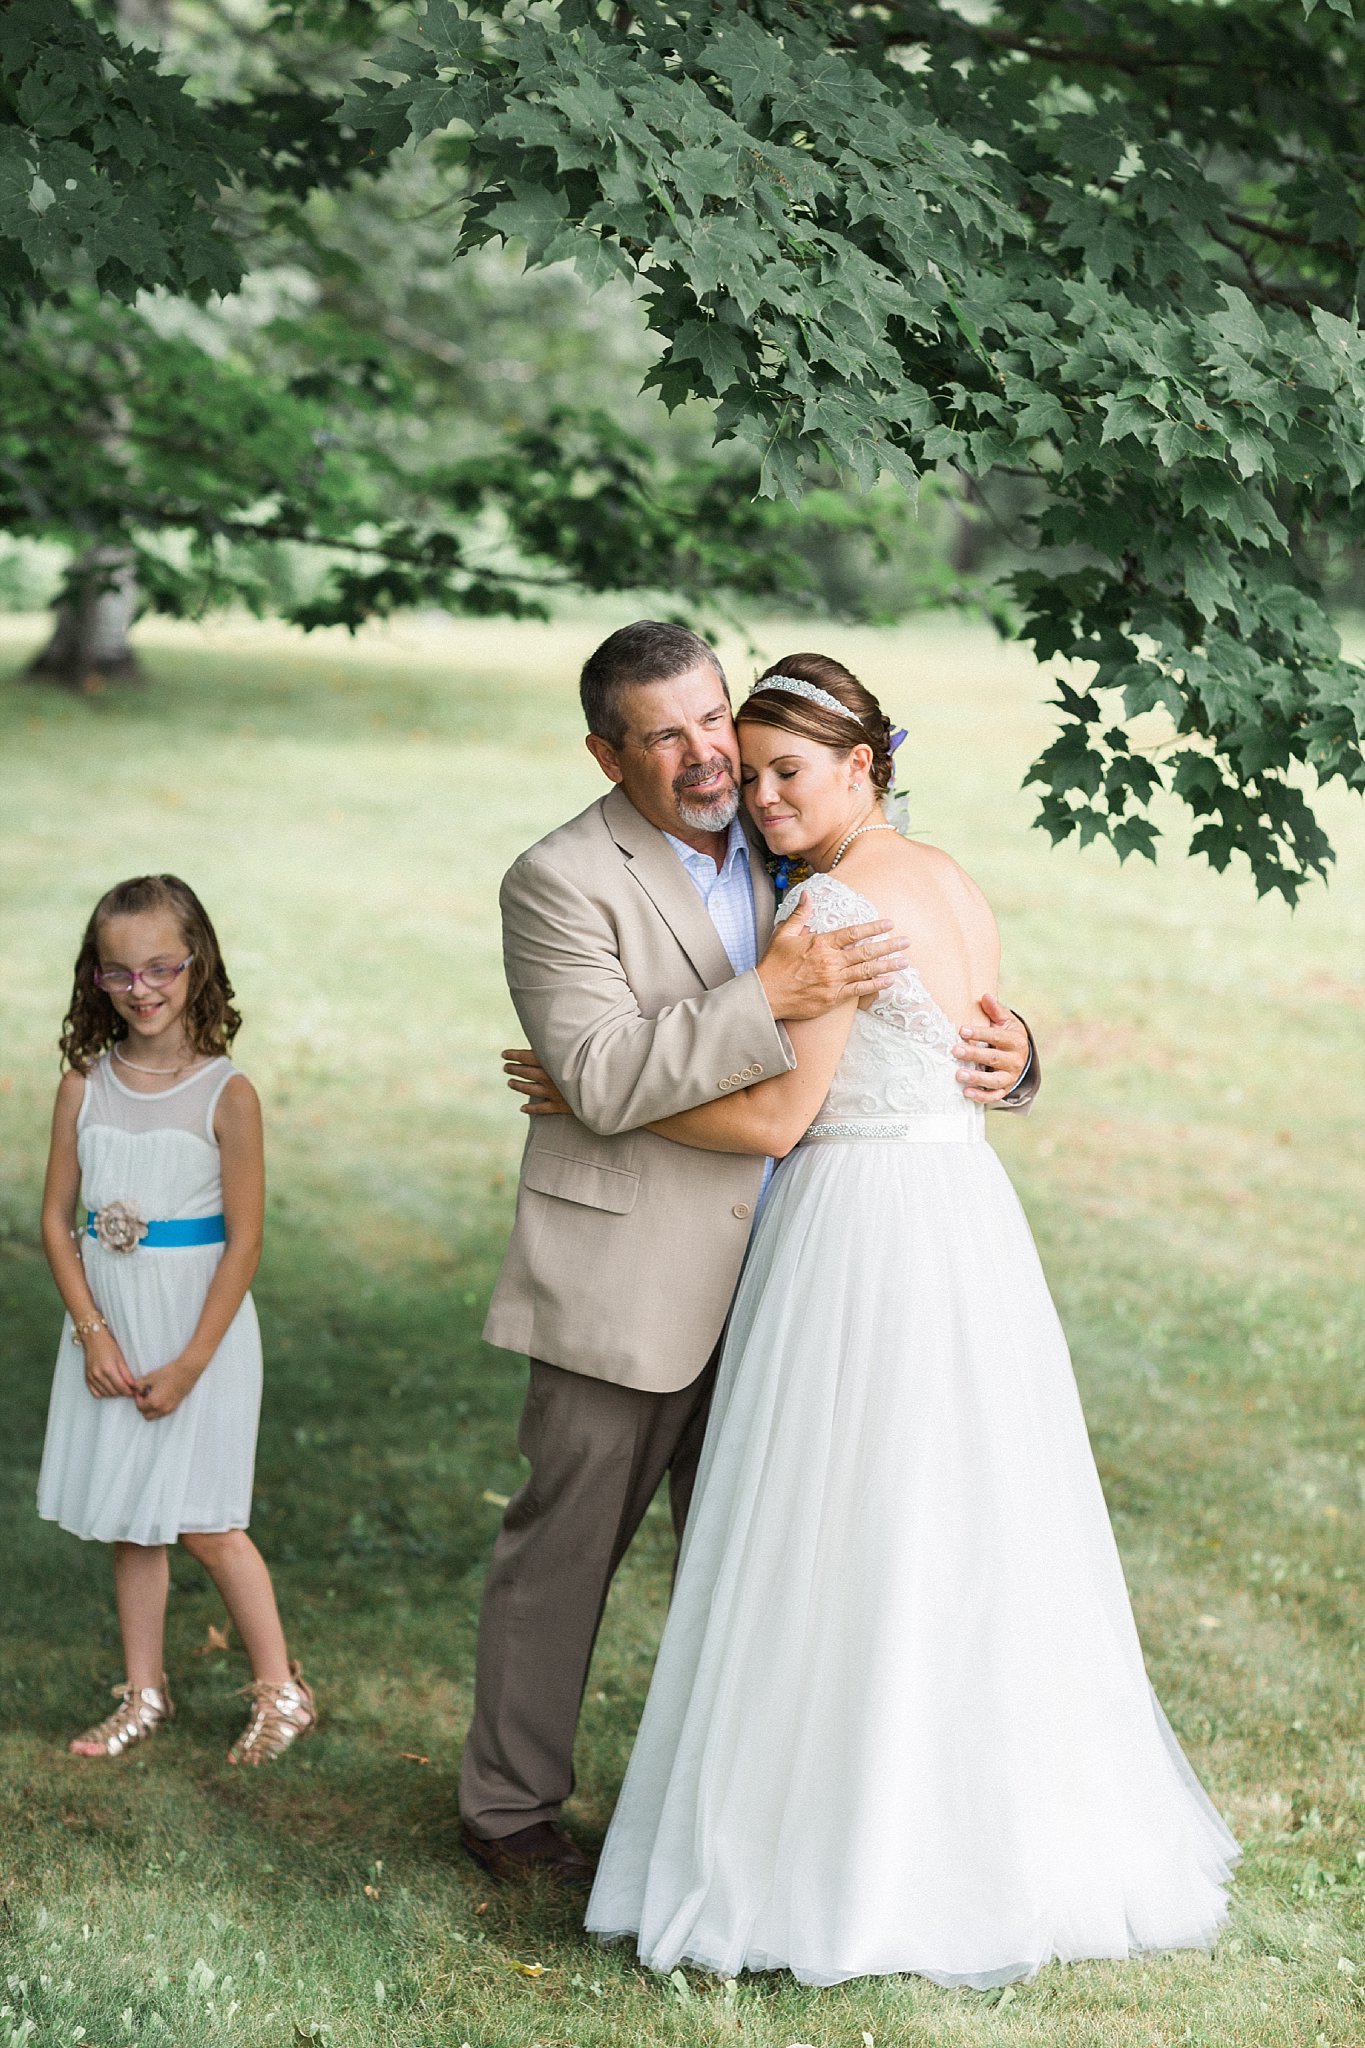 www.james-stokes.com | James Stokes Photography, LLC - father and daughter wedding photo by Wisconsin wedding photographer